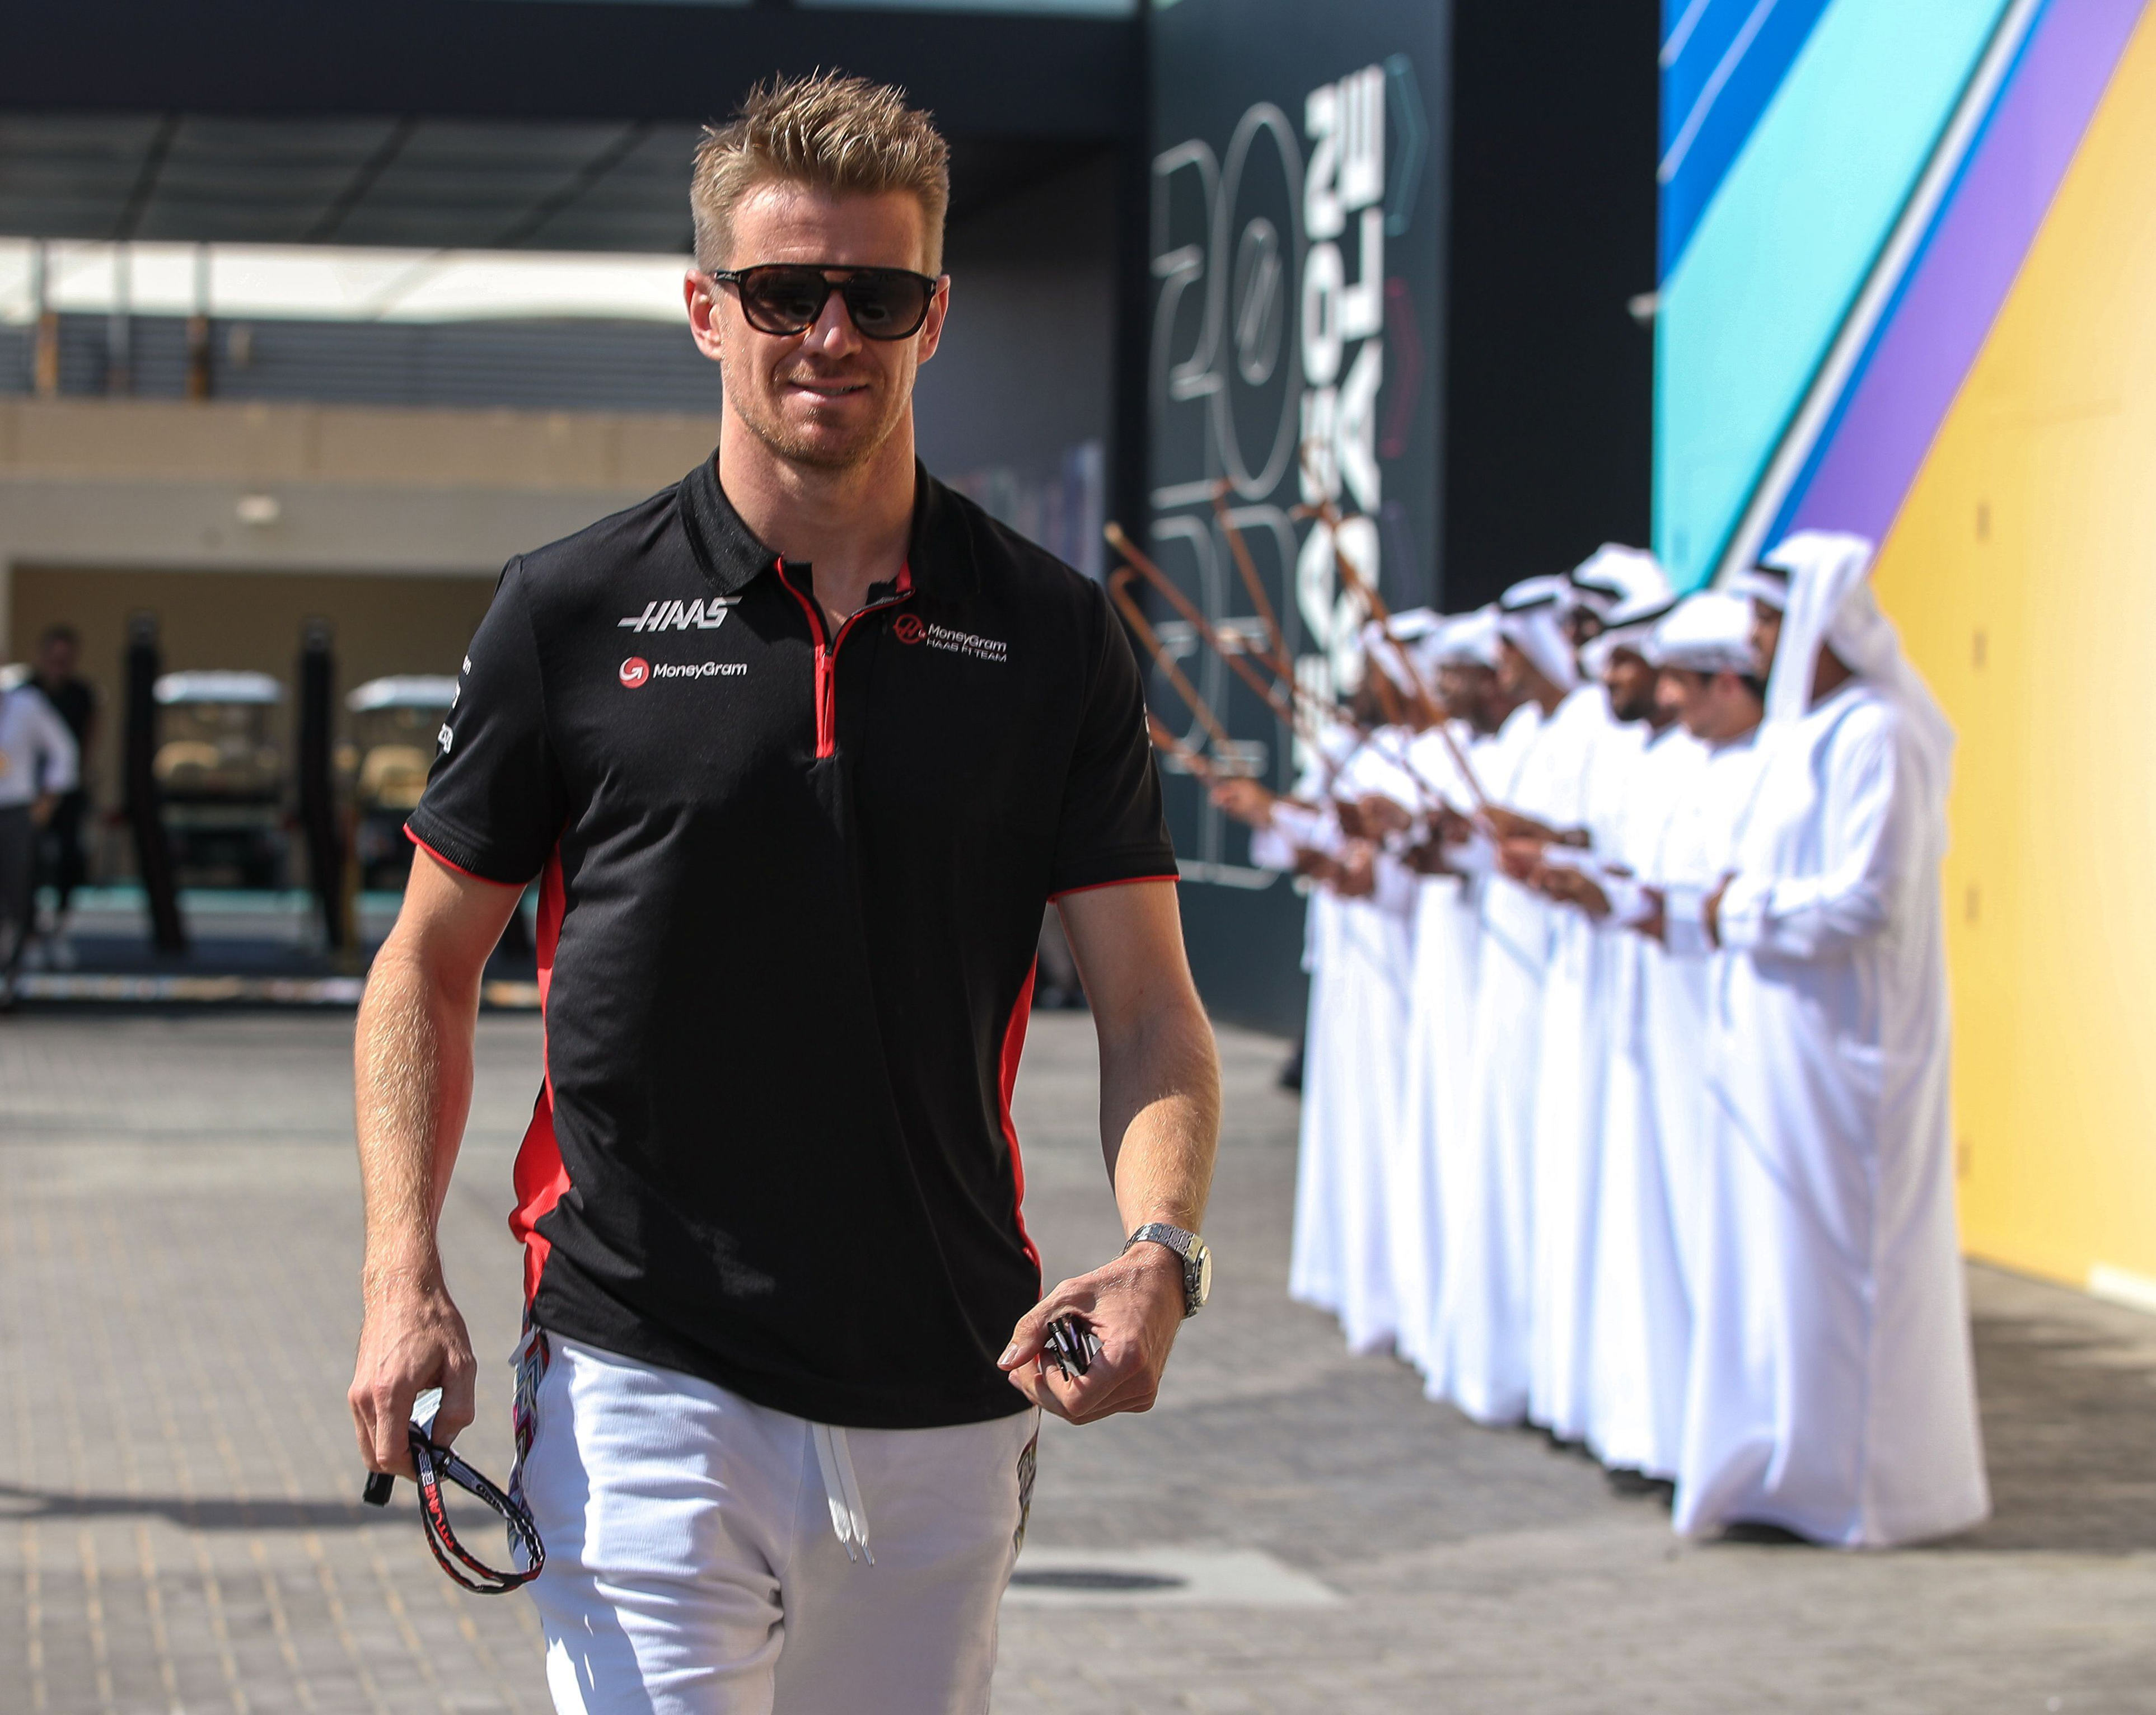 fatigue a major factor after gruelling f1 season concludes at abu dhabi grand prix